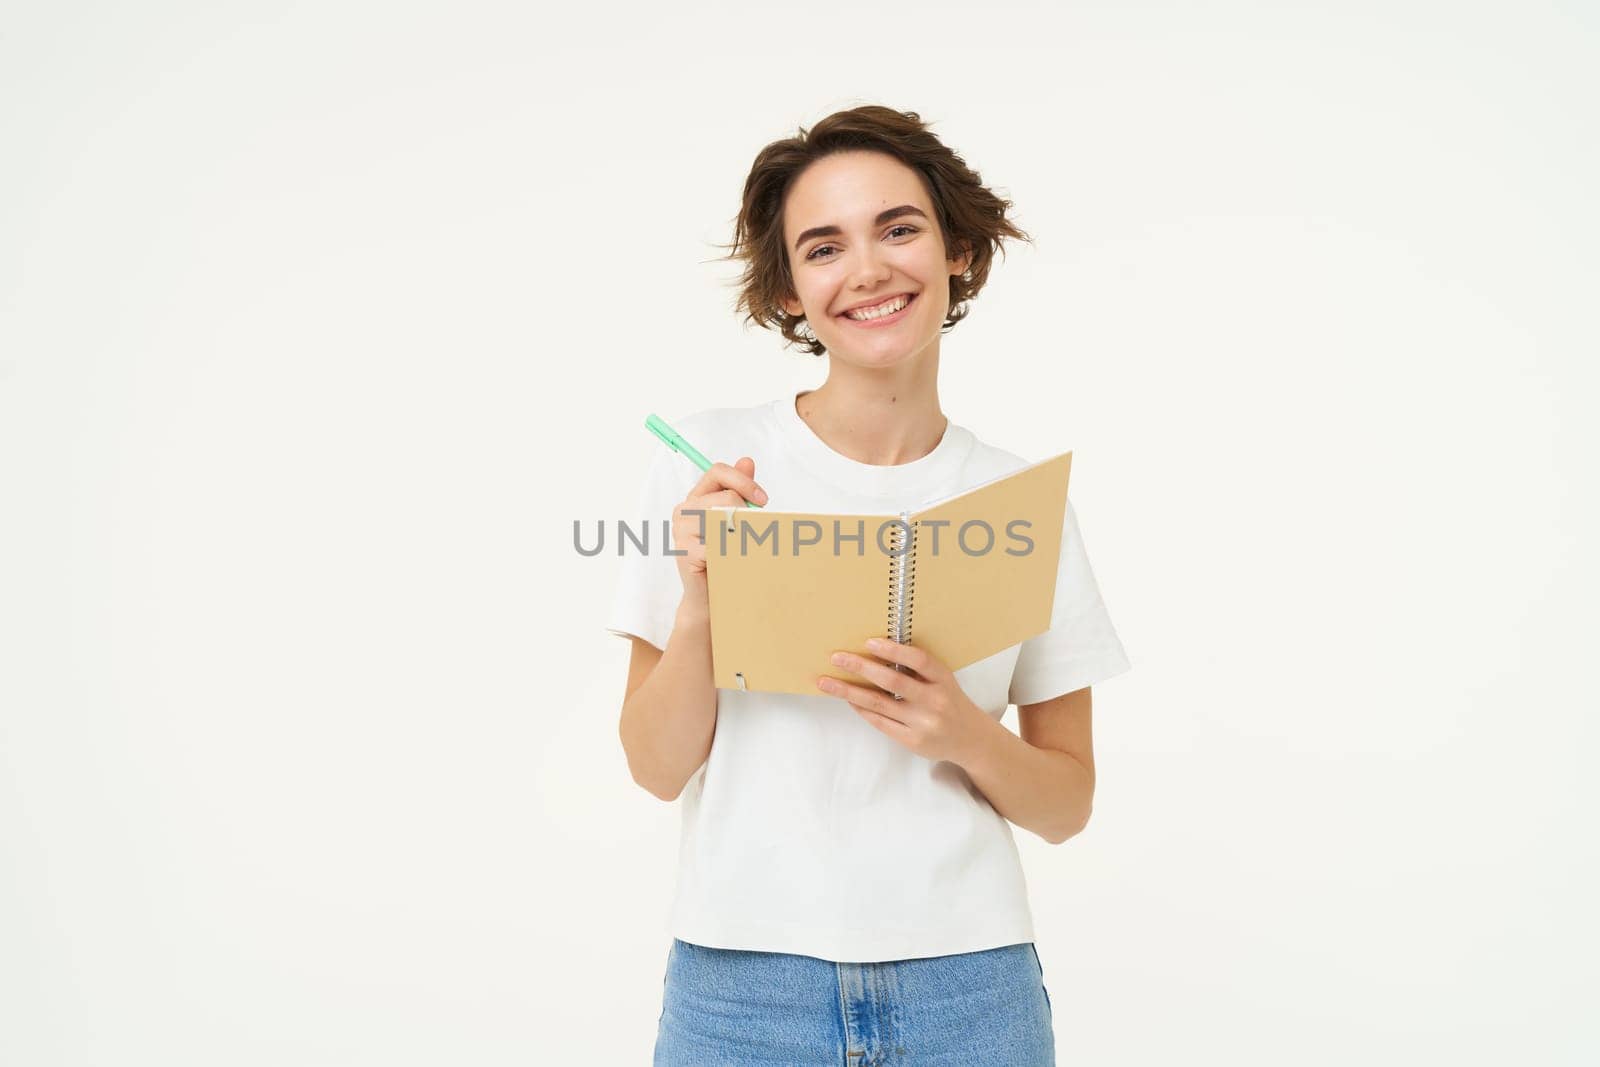 Portrait of smiling, beautiful and creative woman, holding pen and notebook, writing in her planner, has a diary, posing over white studio background.